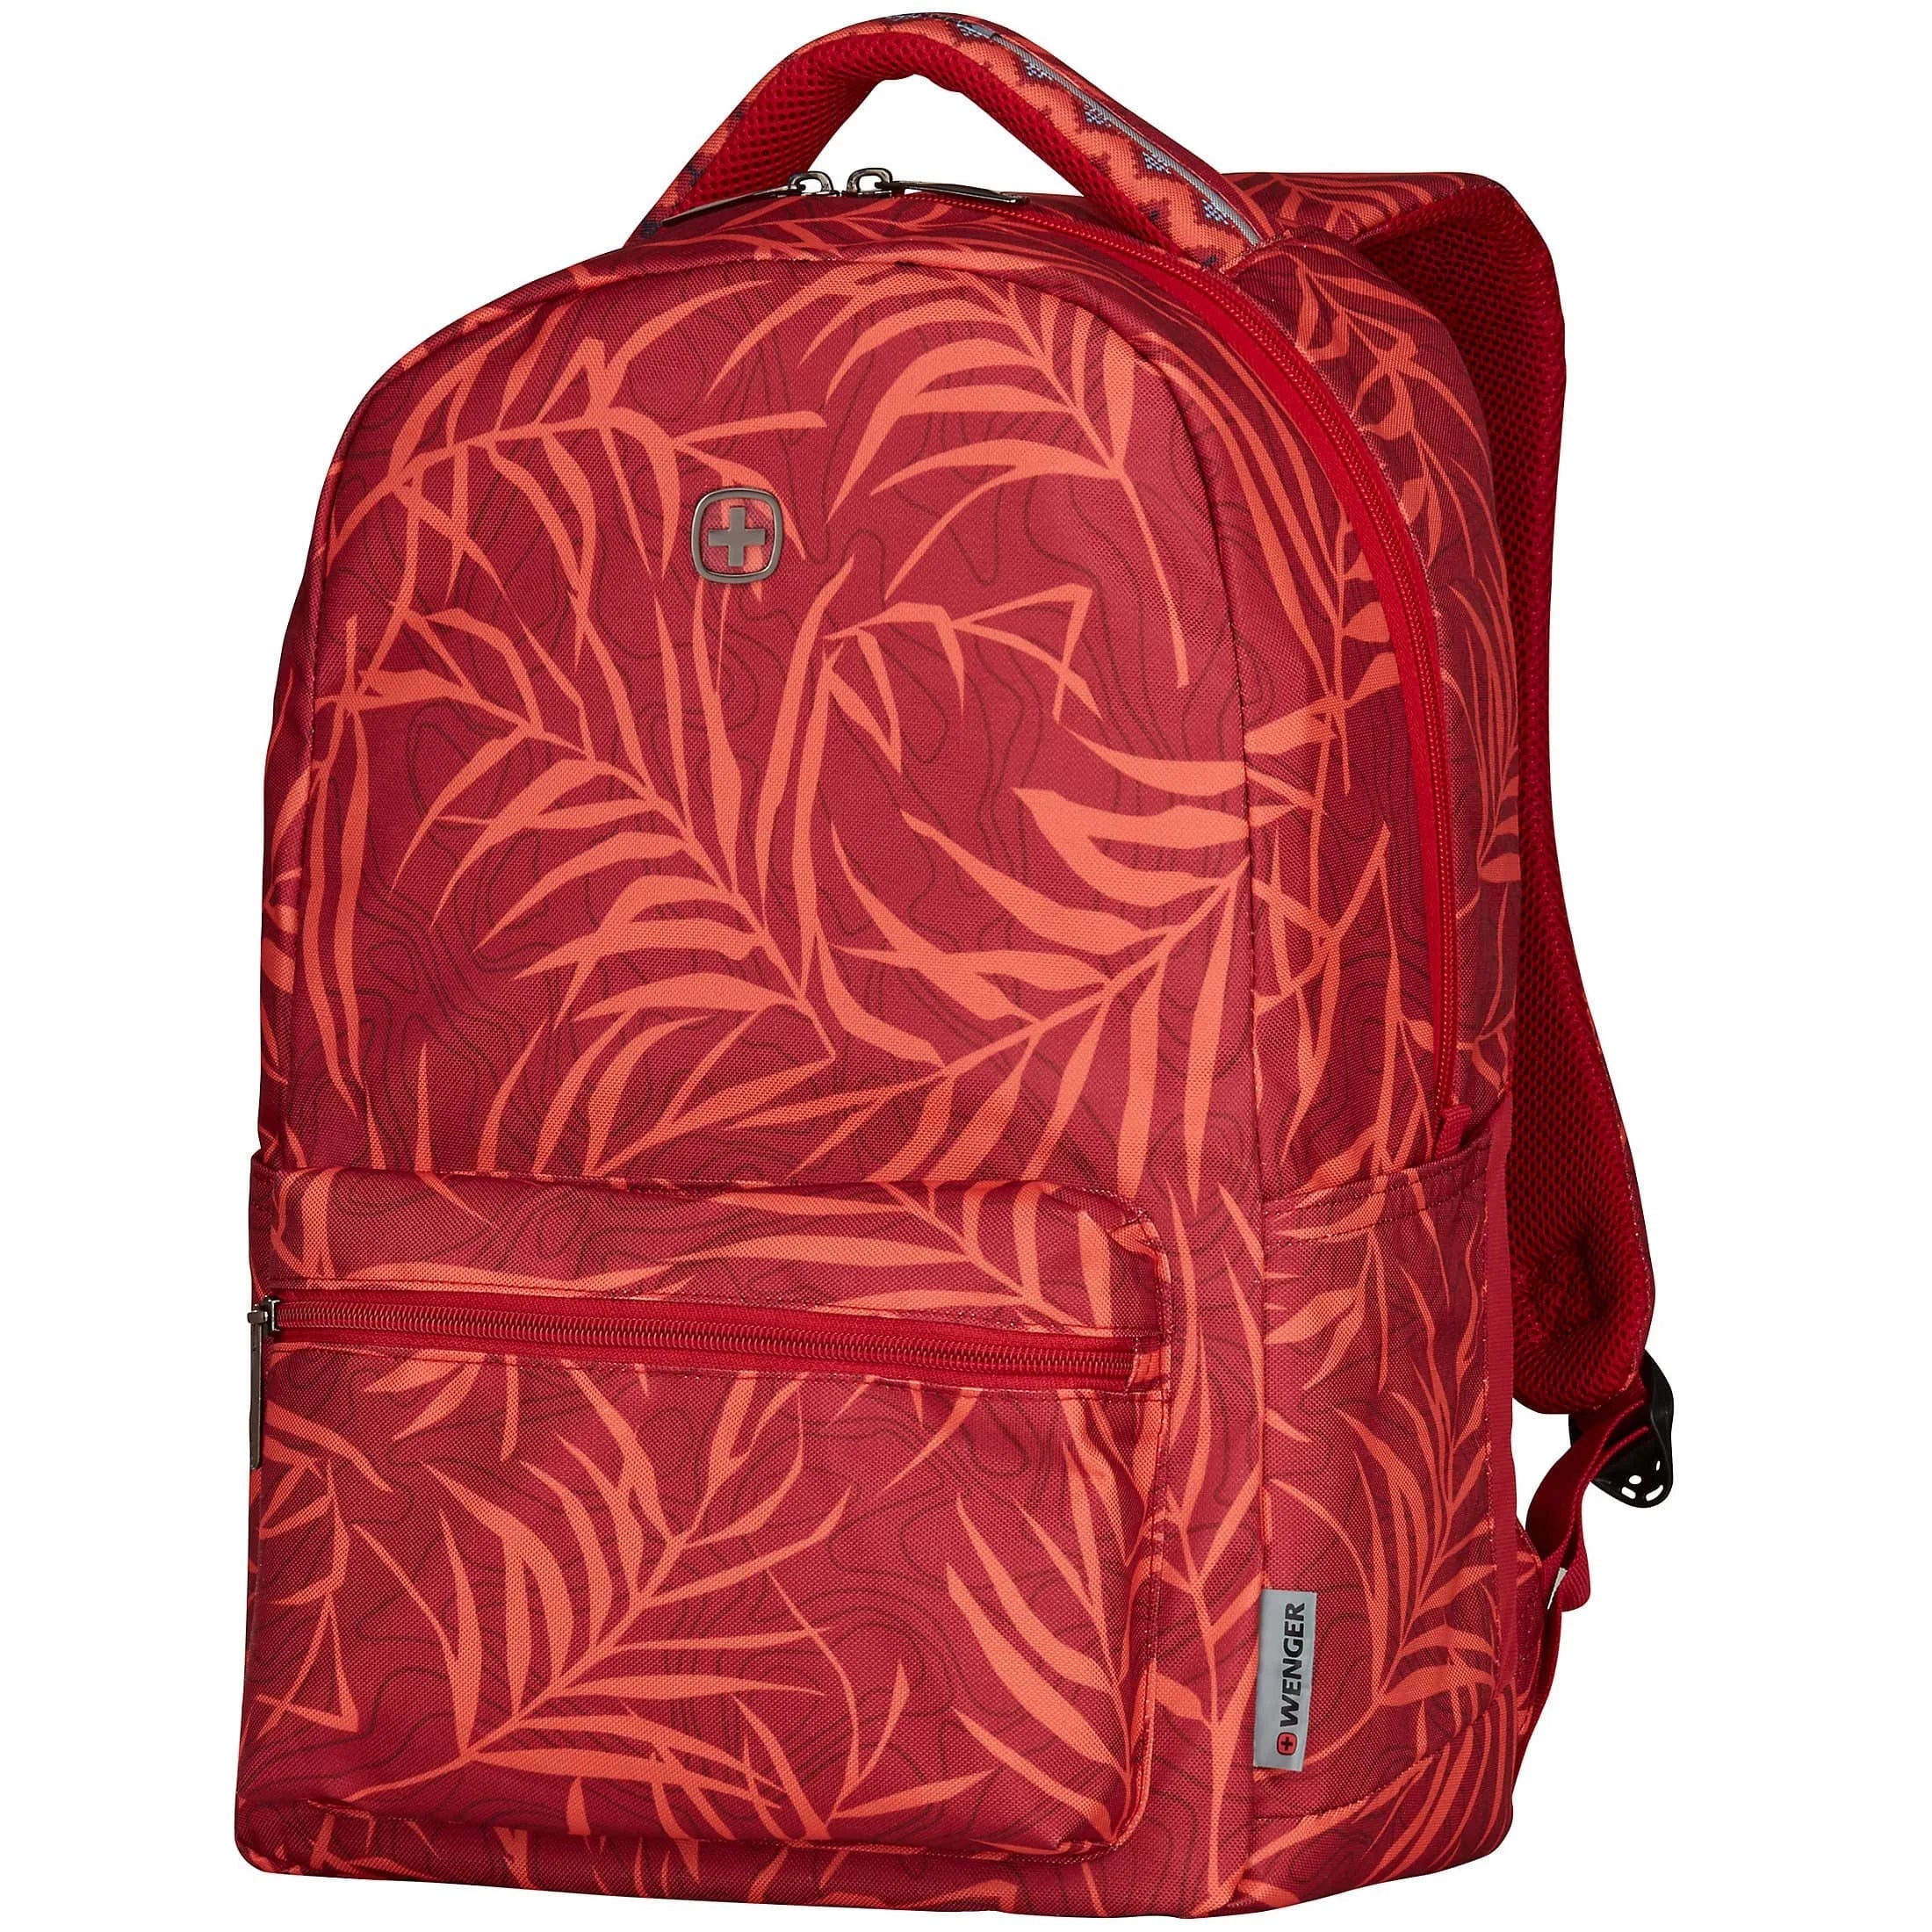 Wenger Business Colleague Laptop Backpack 16 inch 45 cm - Red Fern Print